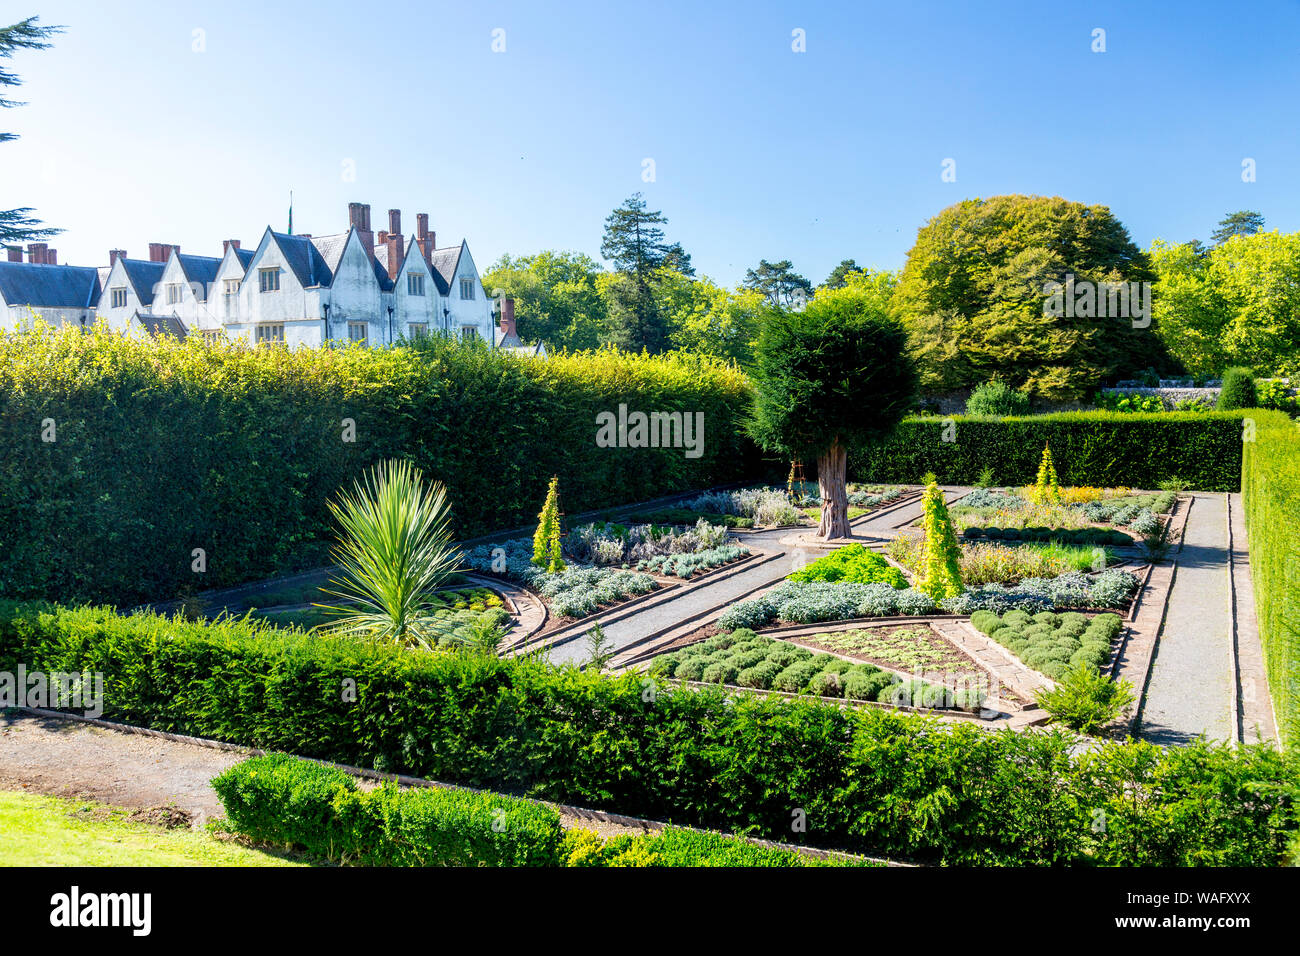 St Fagans Castle from 1580 is surrounded by a mixture of formal and informal gardens at St Fagans National Museum of Welsh History, Cardiff, Wales, UK Stock Photo